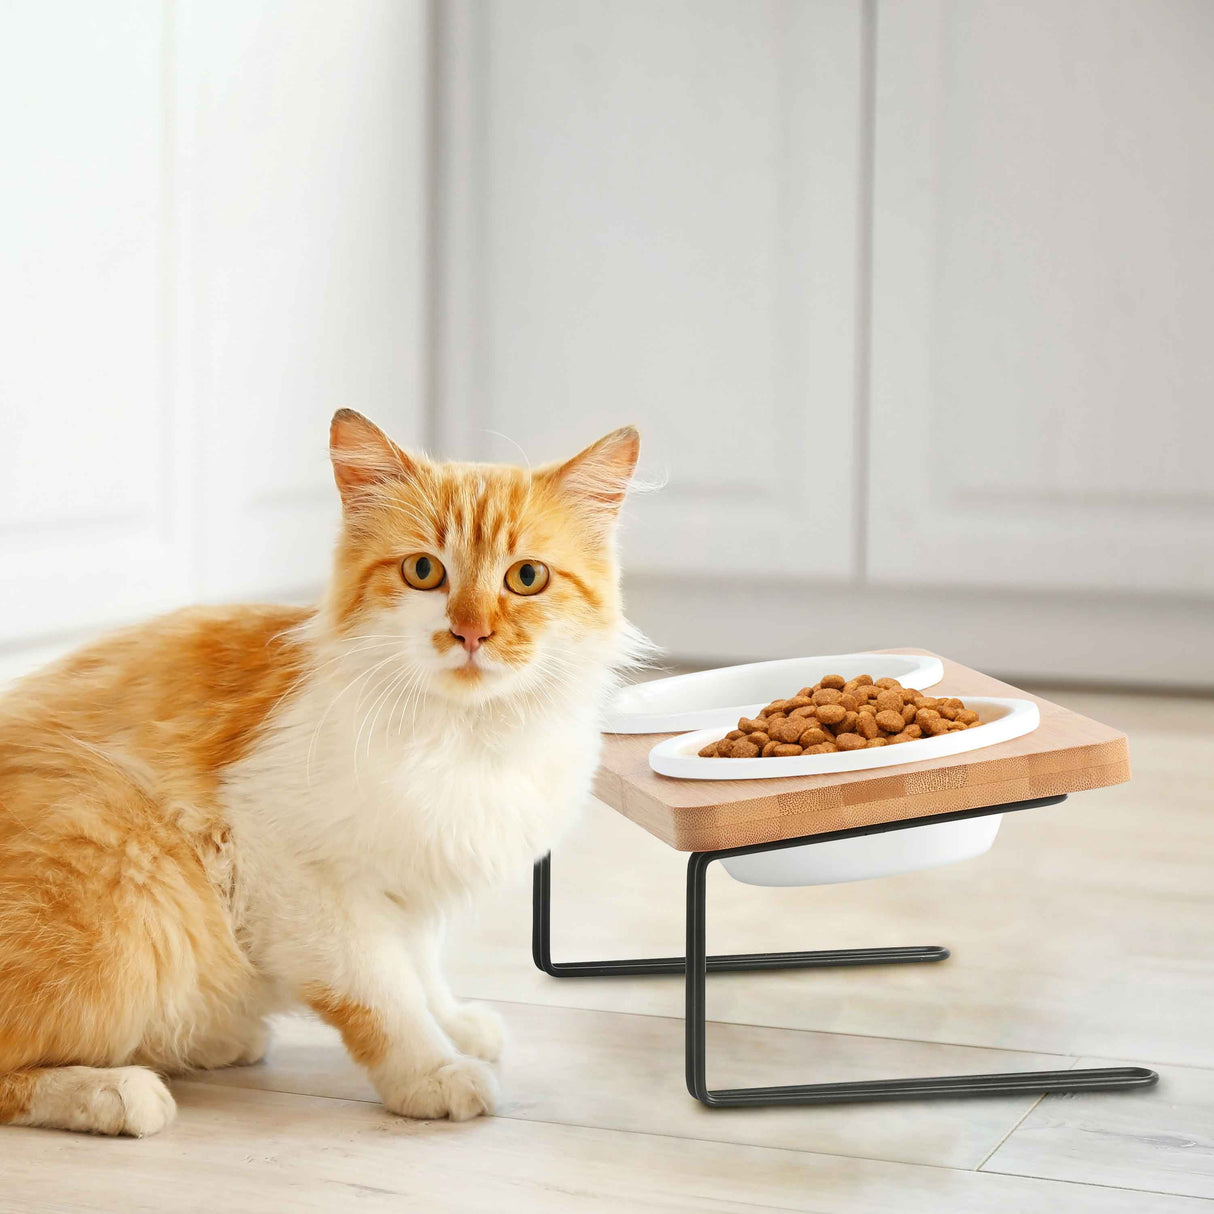 Lifestyle image of cat eating at feeder